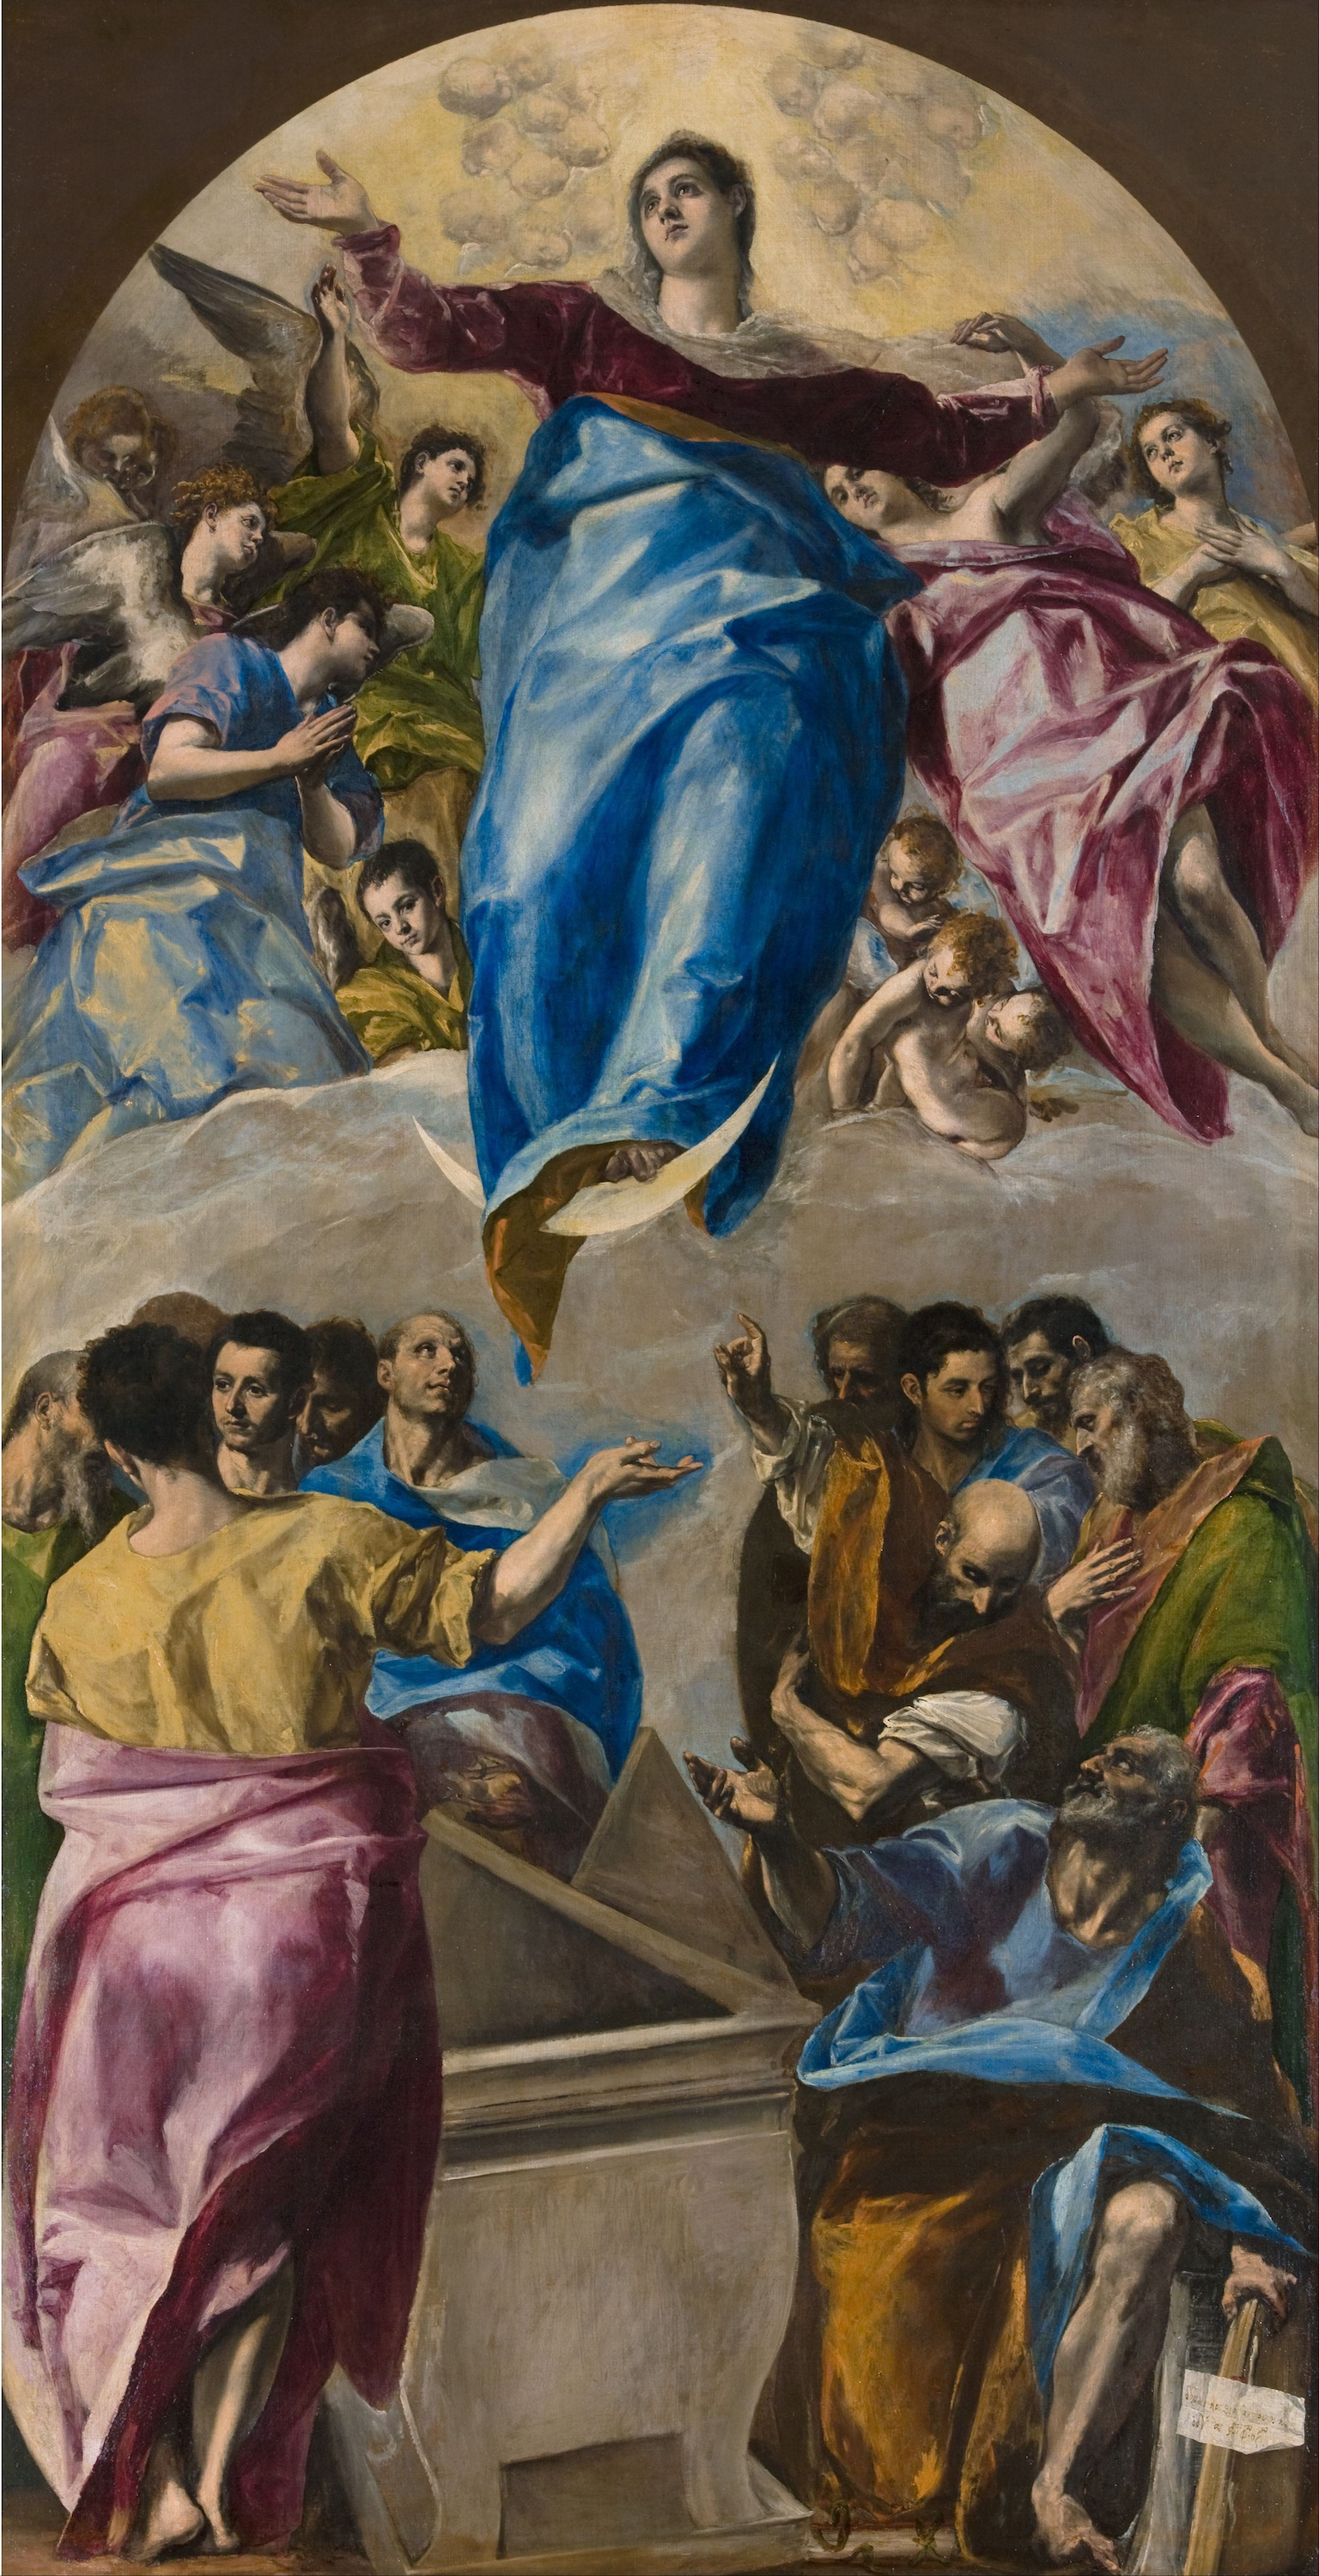 The Assumption of the Virgin by El Greco - 1577 - 401 × 229 cm Art Institute of Chicago